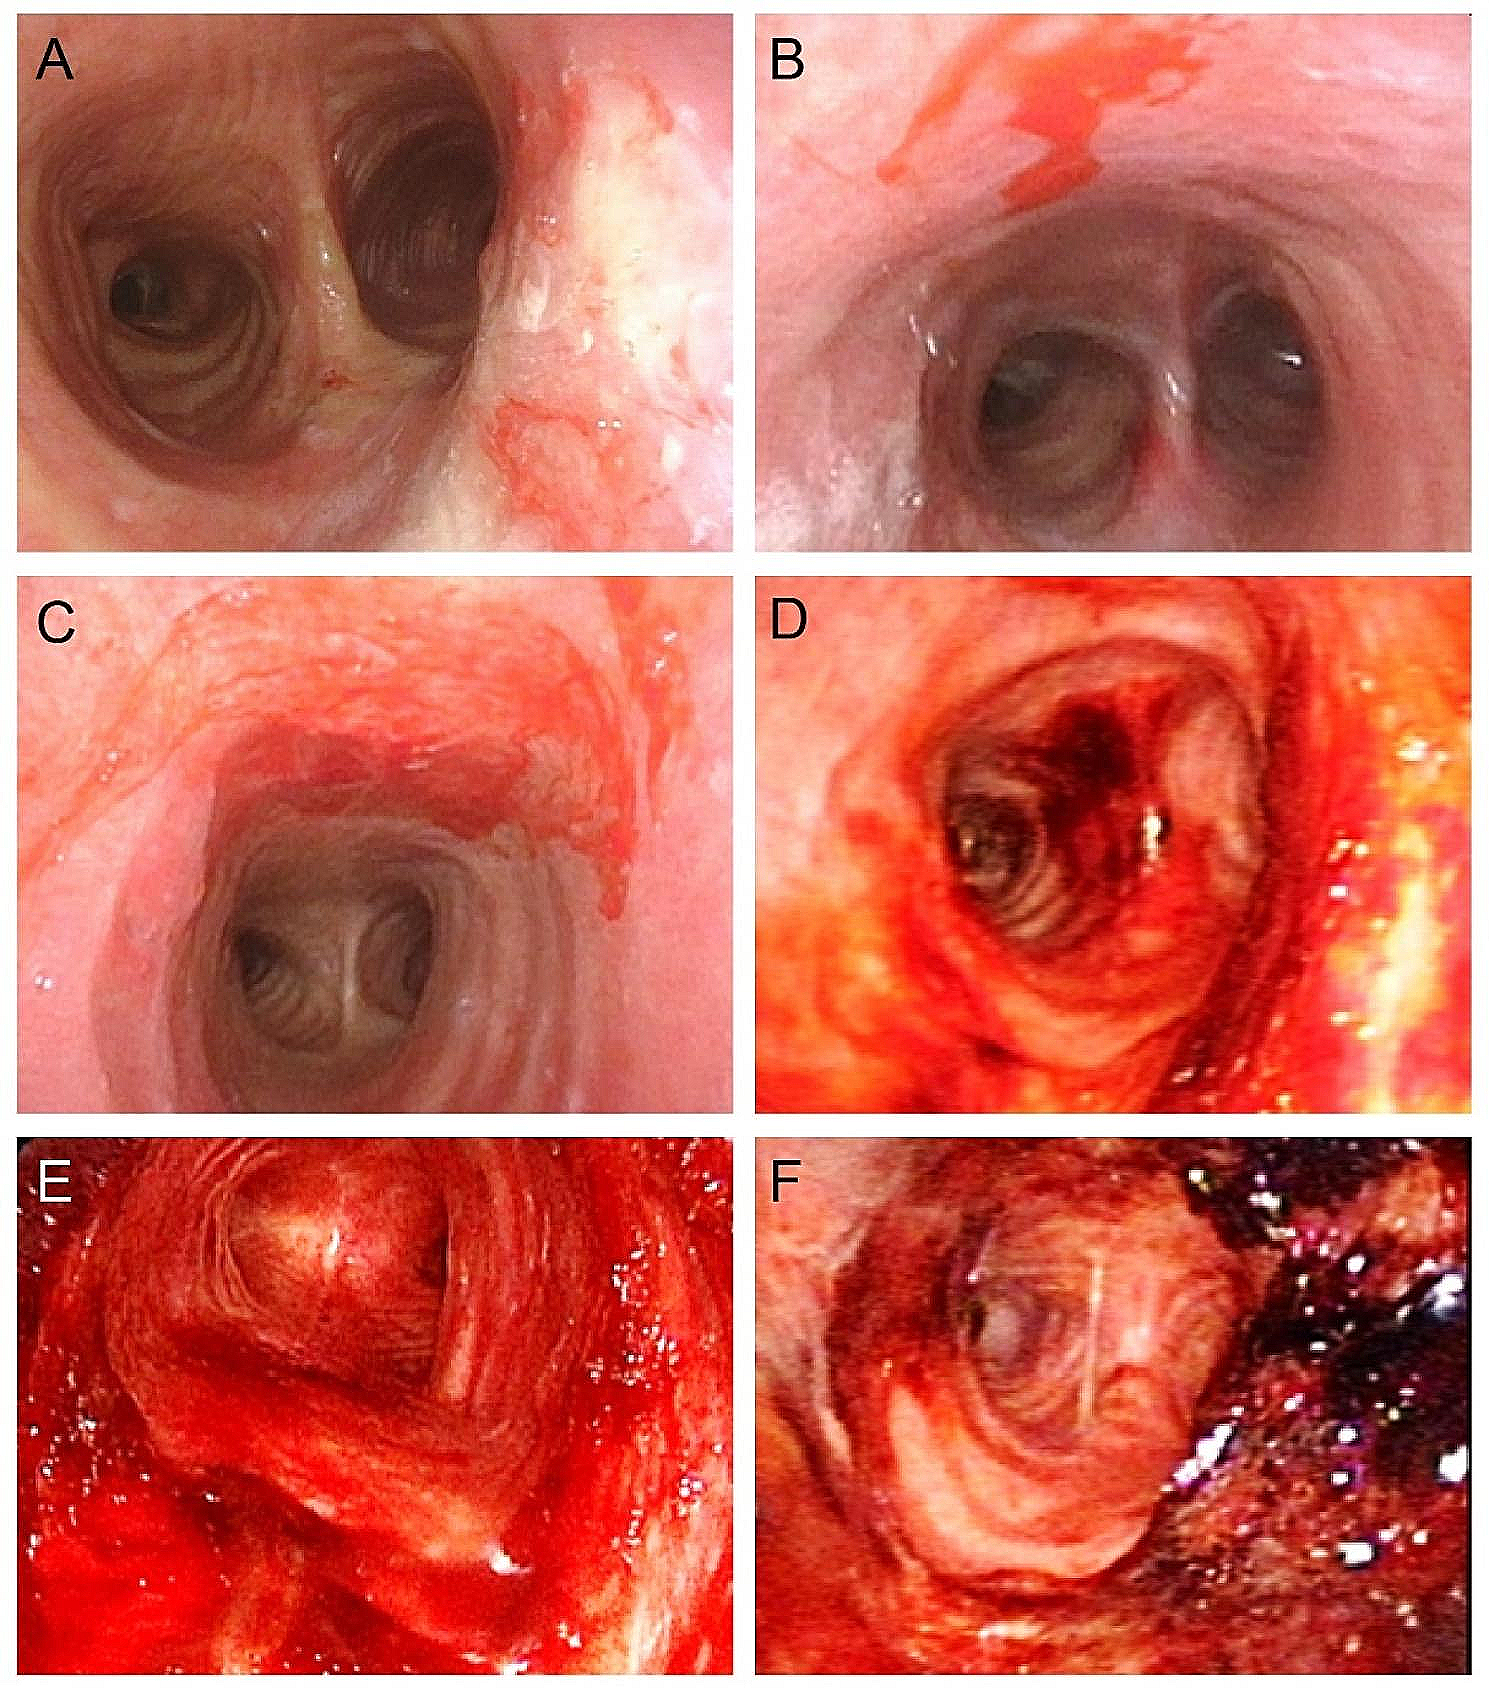 SARS-CoV-2 infection increases airway bleeding risk in patients after tracheostomies